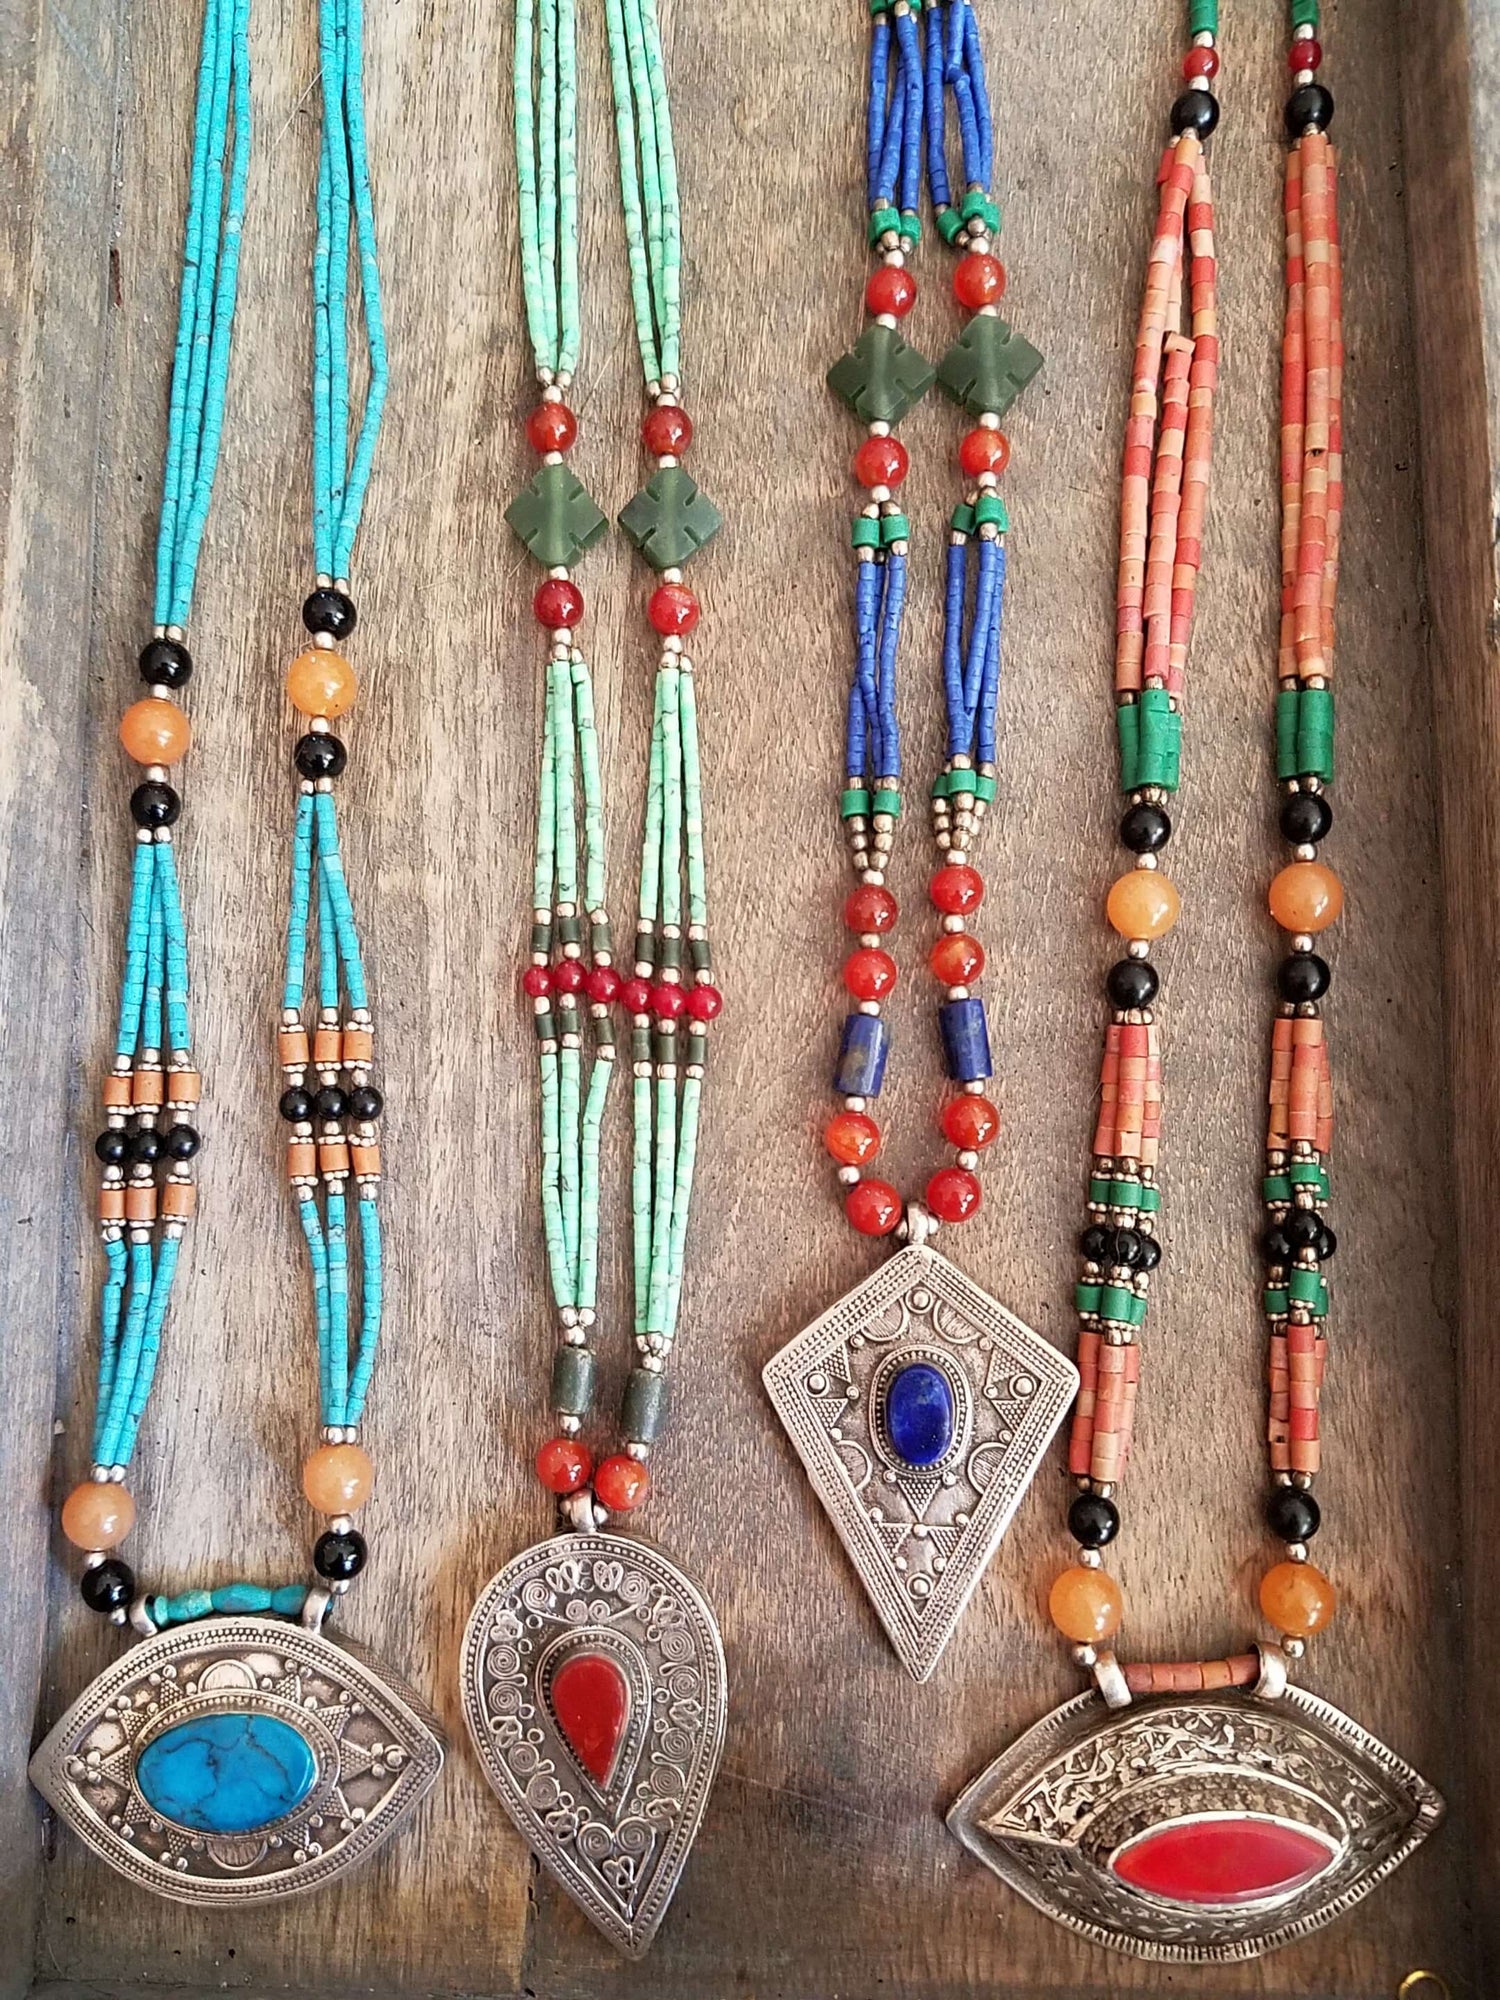 Tribal and Boho Style Jewelry - Colorful necklaces, earrings, bracelets and rings with creative gemstones and intricate metal work.  